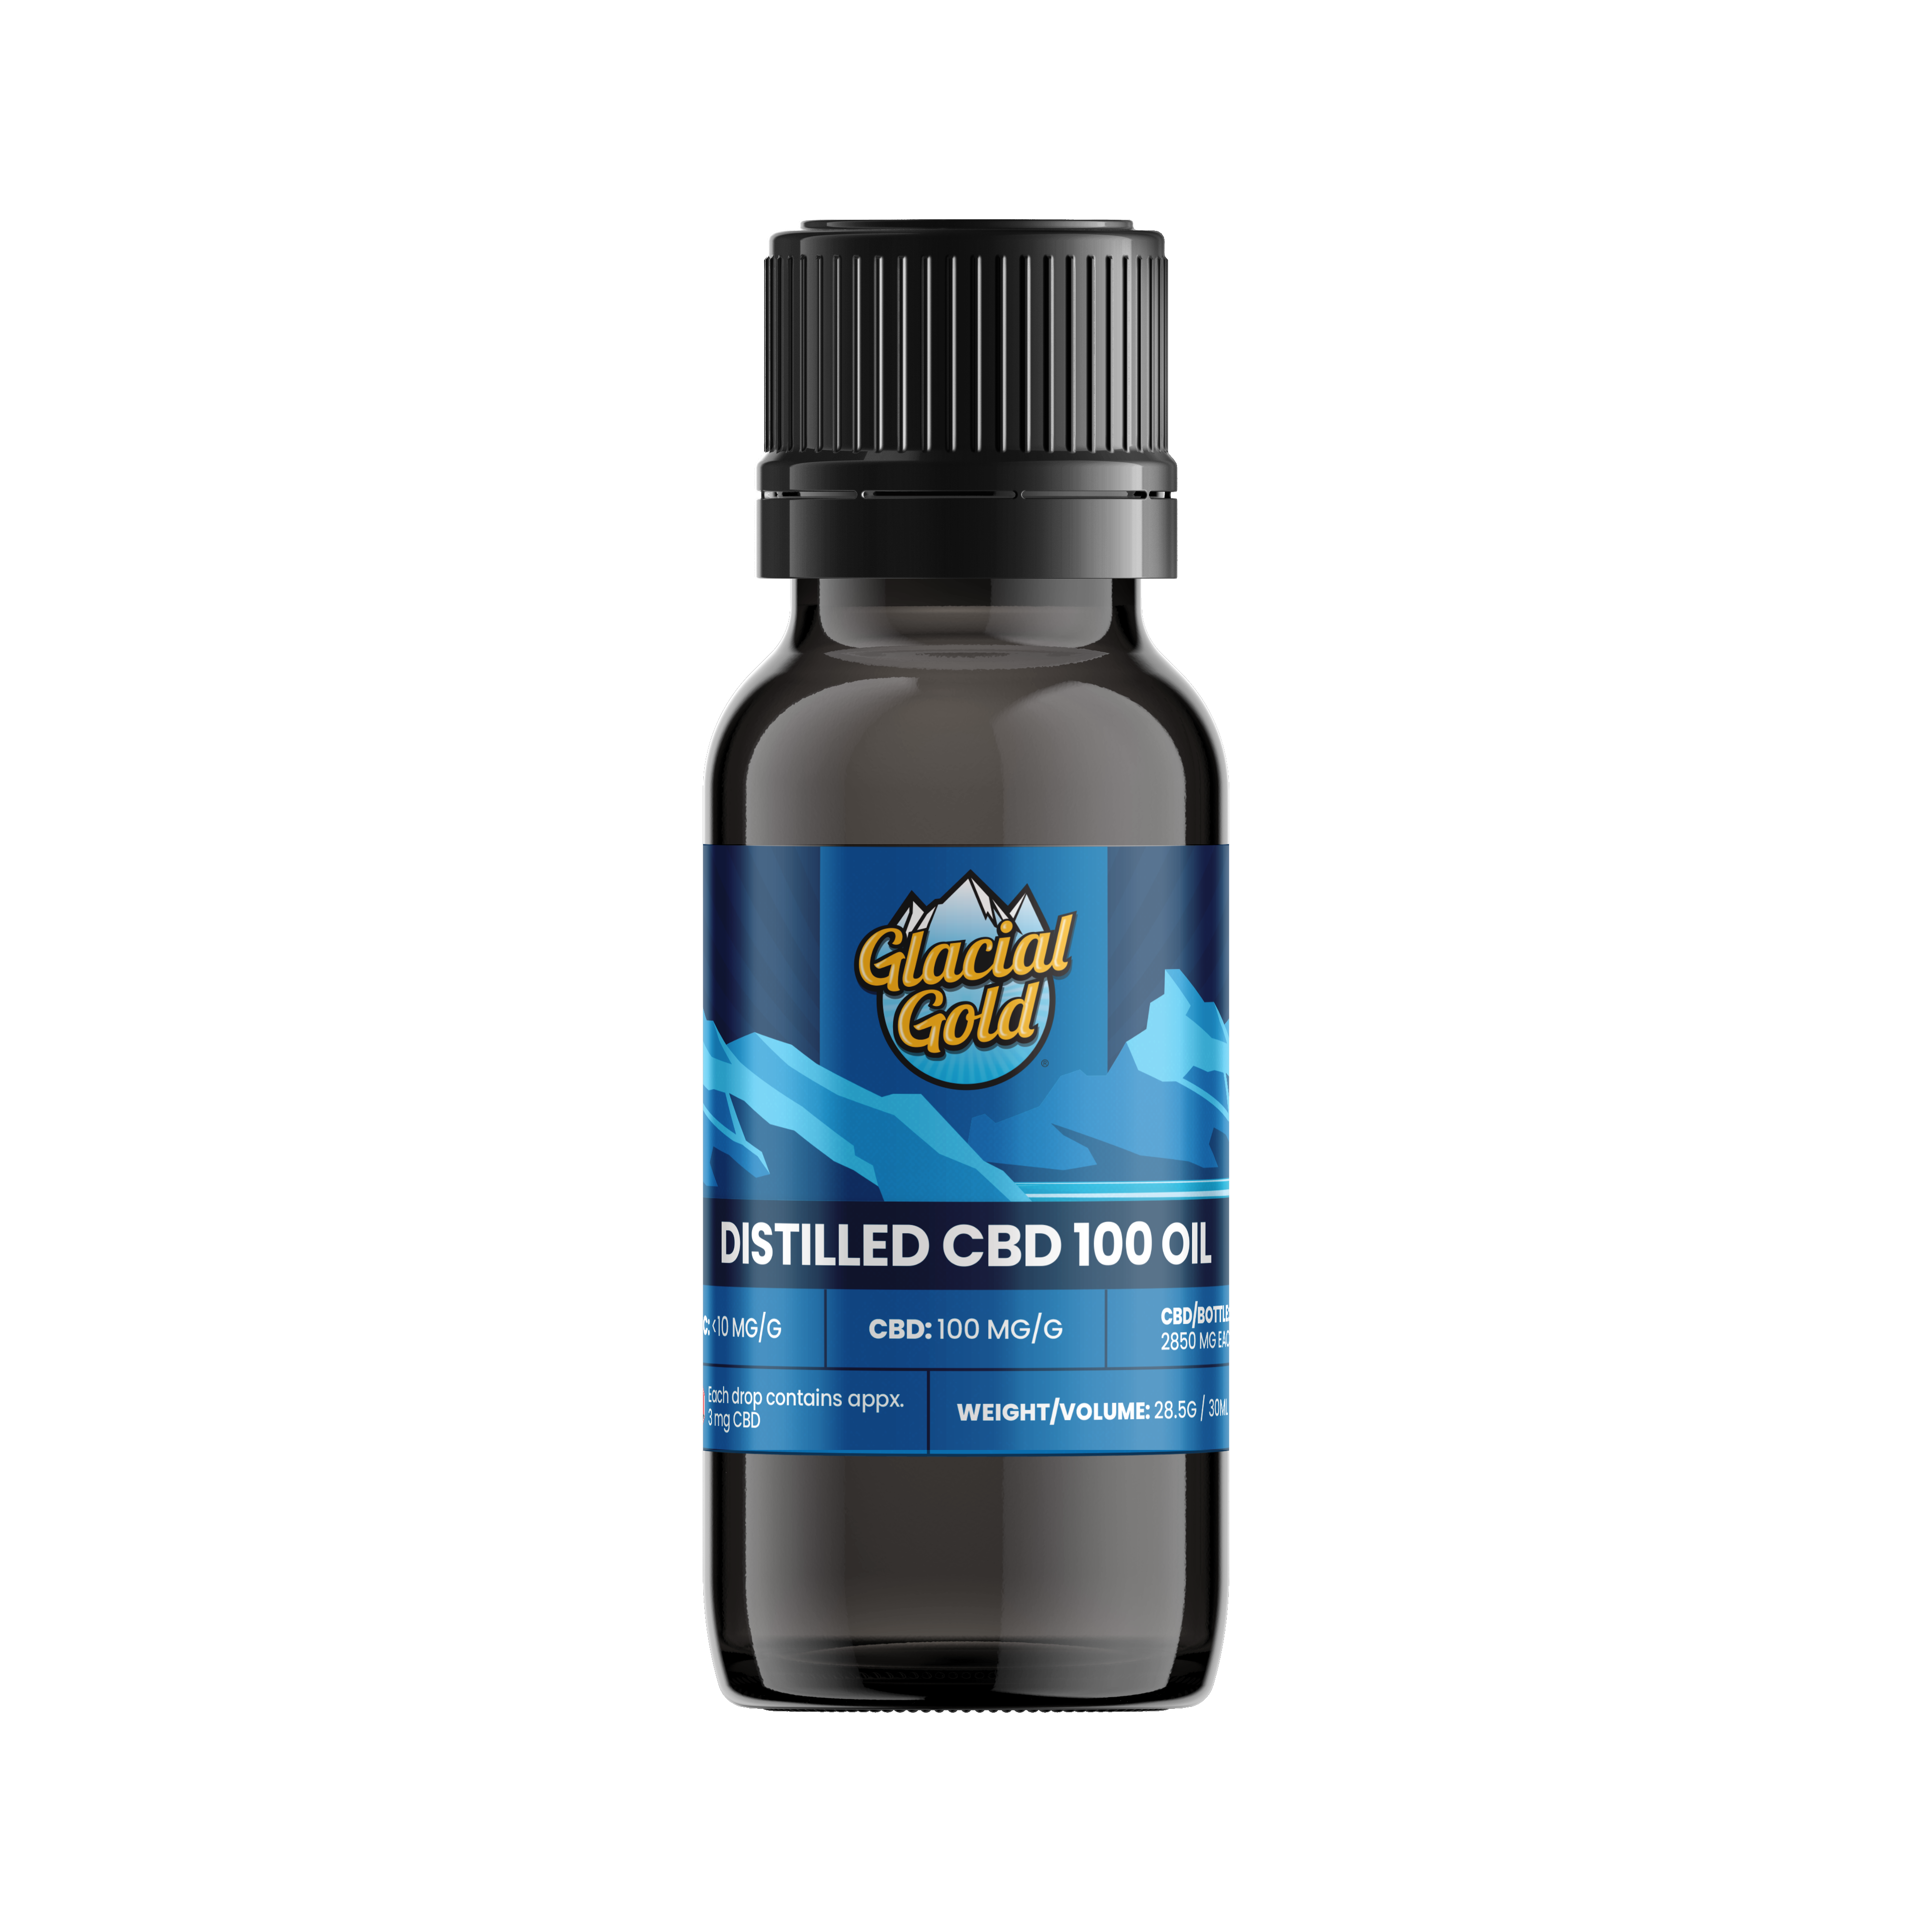 Cannabis Product Glacial Gold - Distilled CBD 100 Oil Drops by Glacial Gold